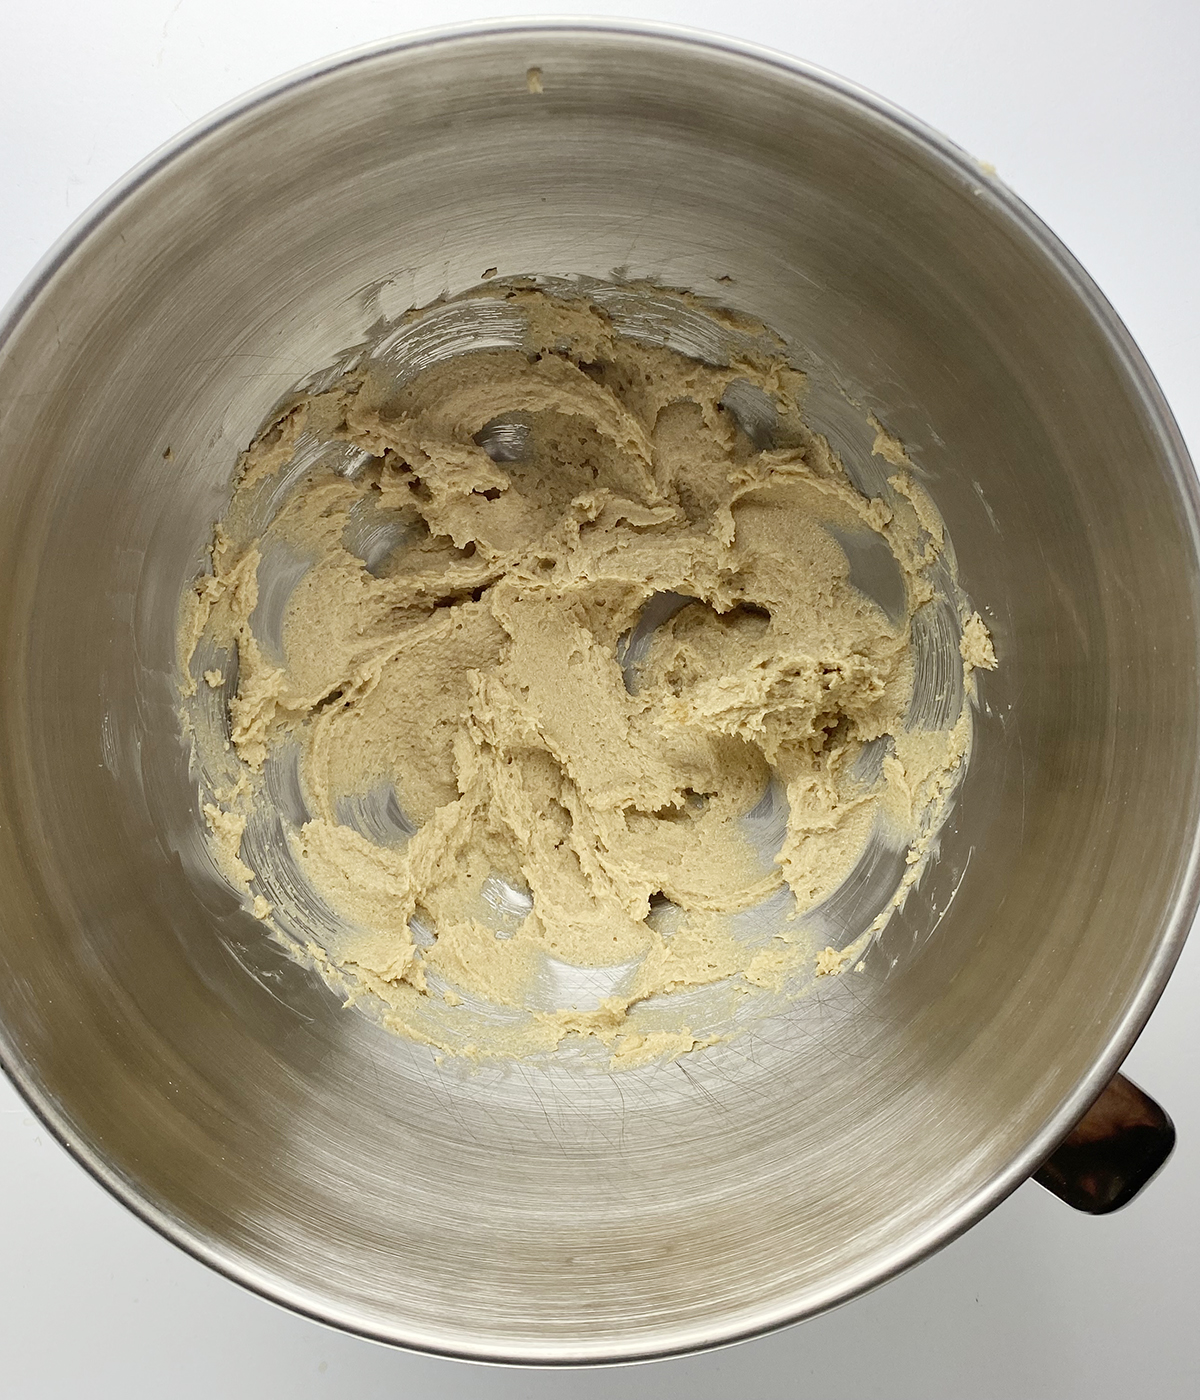 Creamed butter and brown sugar in mixing bowl.